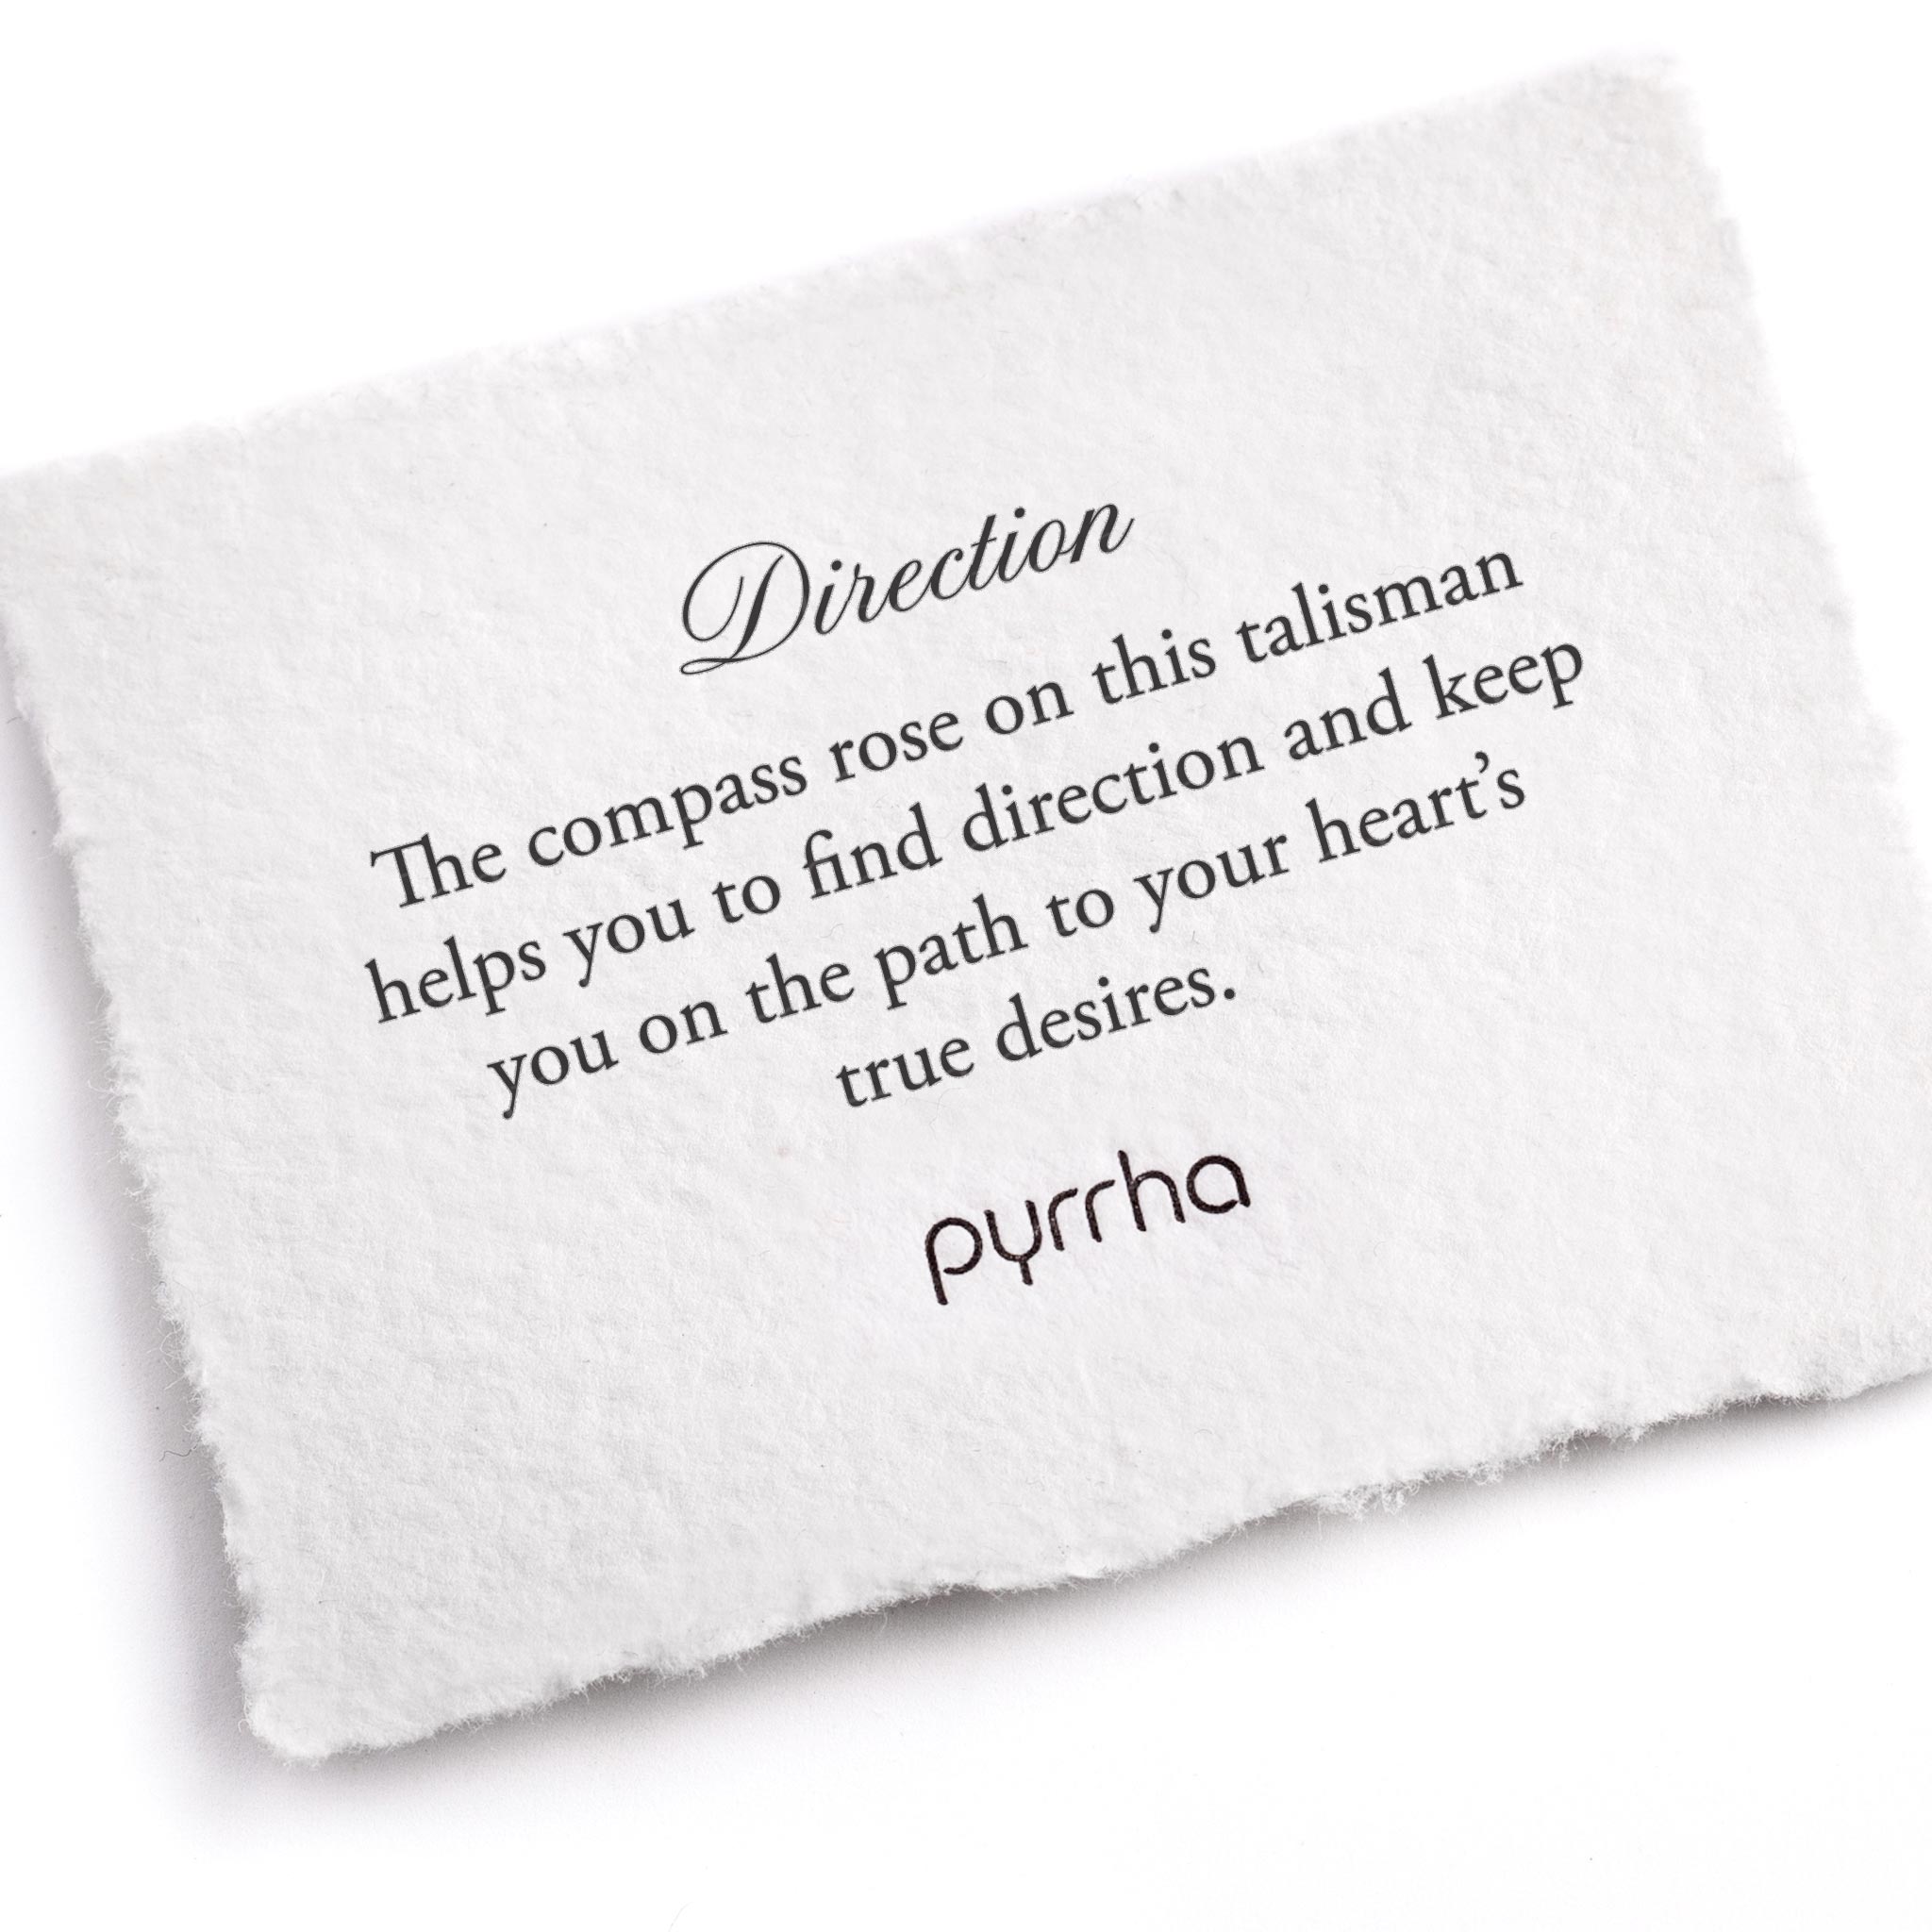 A hand-torn, letterpress printed card describing the meaning for Pyrrha's Direction Talisman Necklace